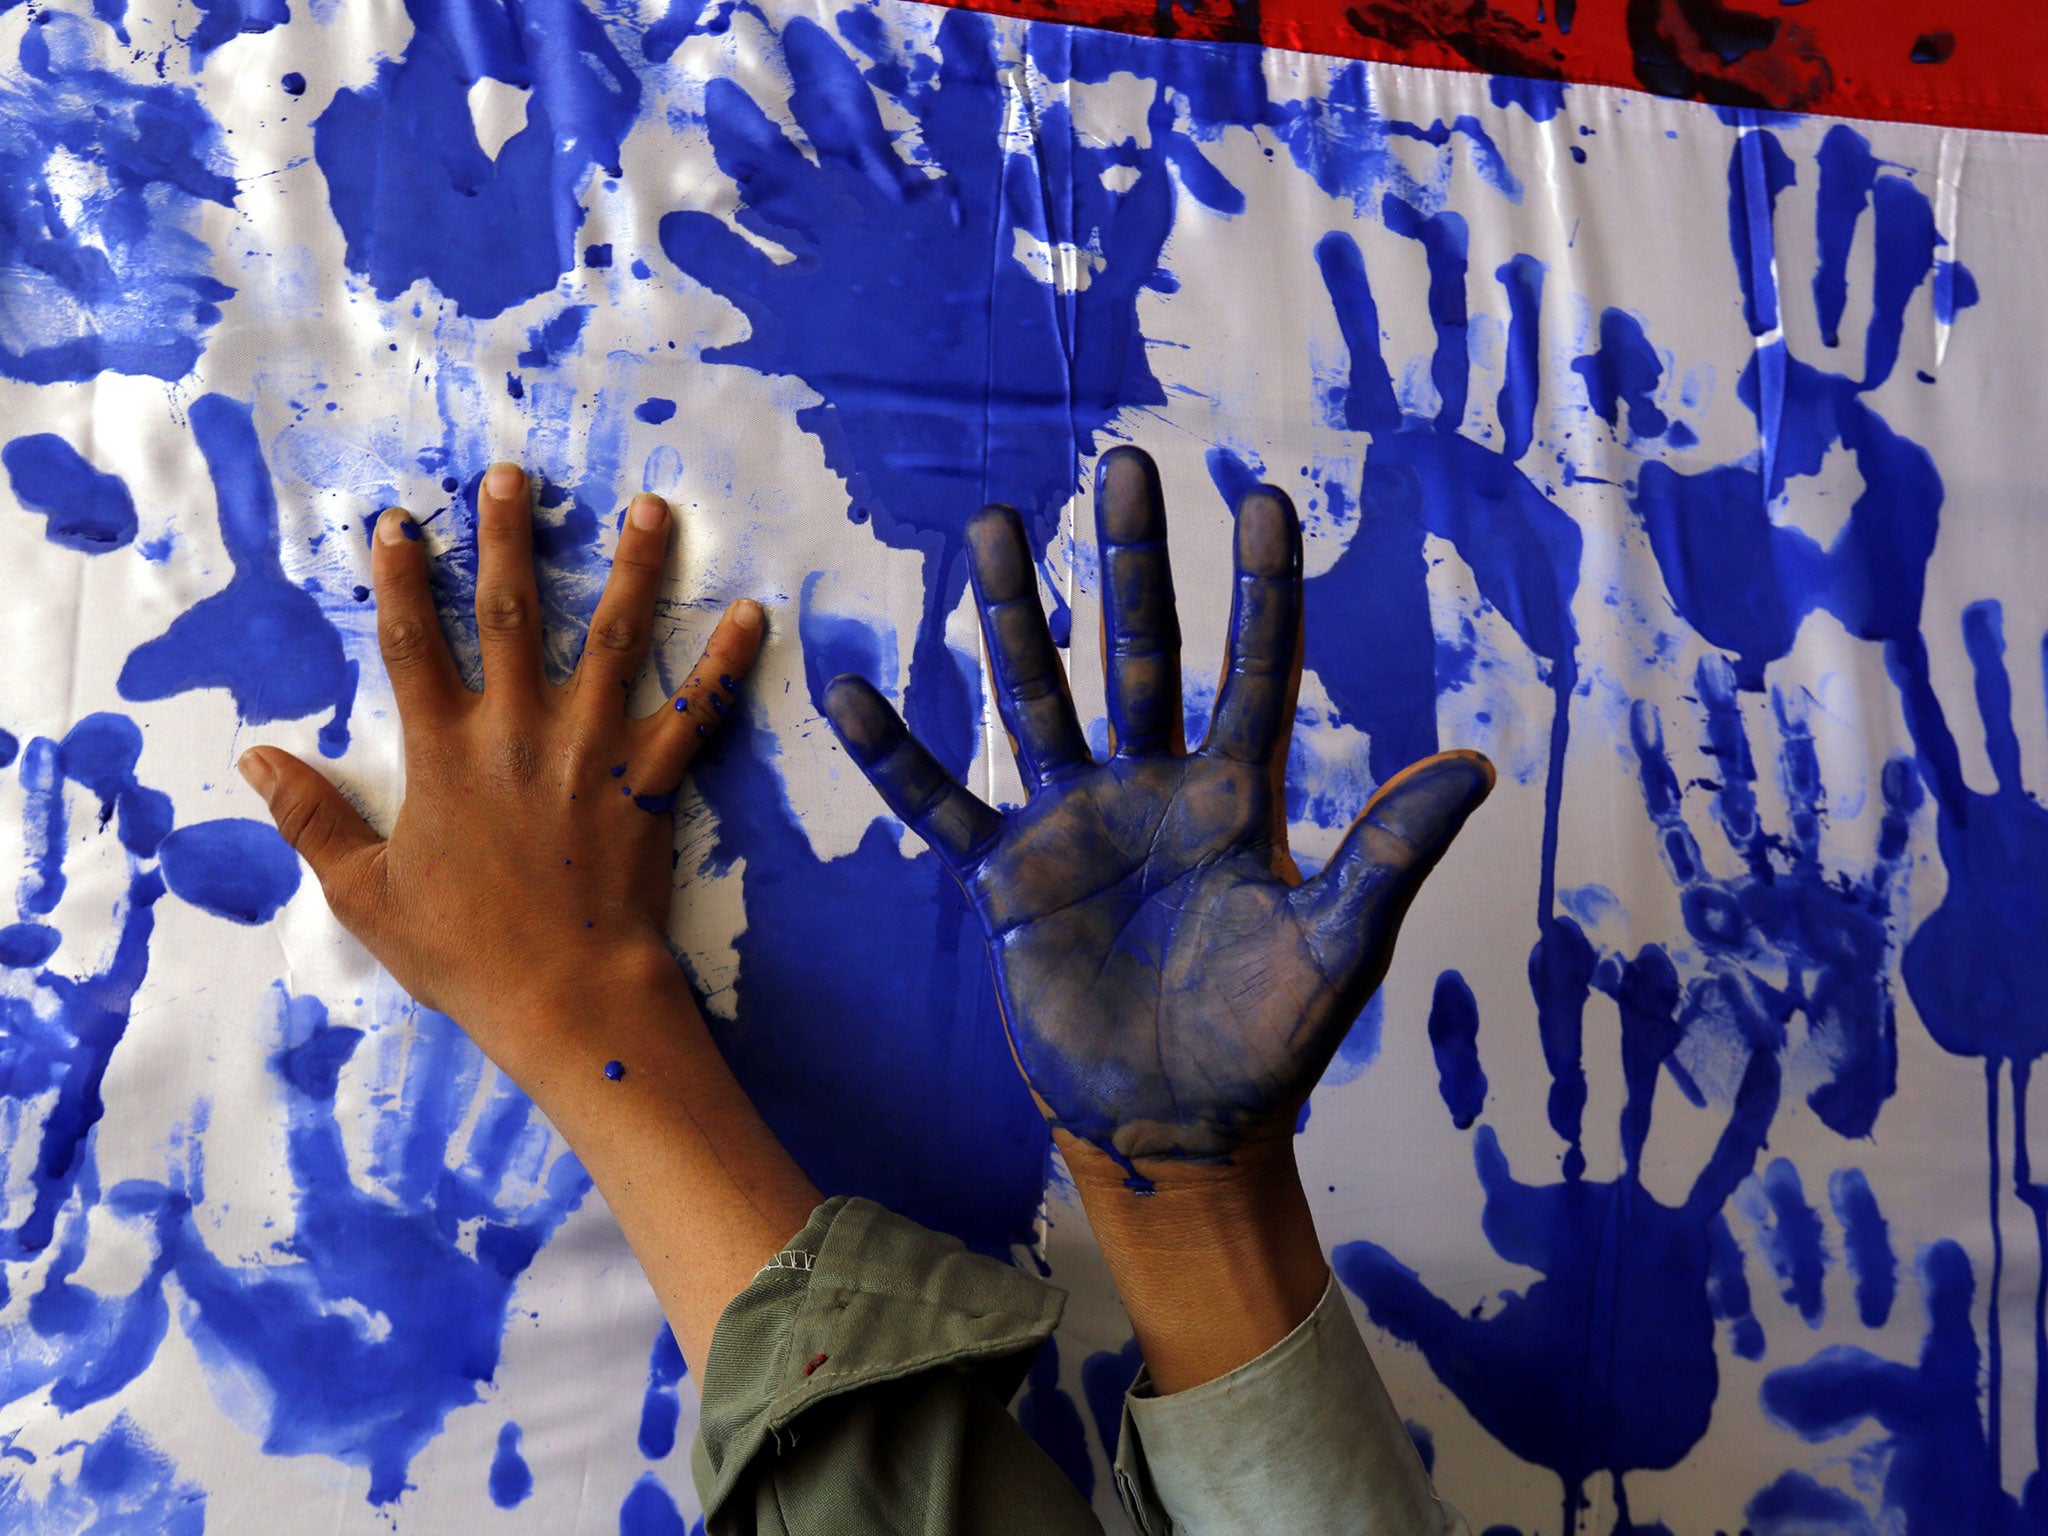 Children put their palm prints on a Yemeni flag as a symbol of protest against Saudi-led operations in Sanaa